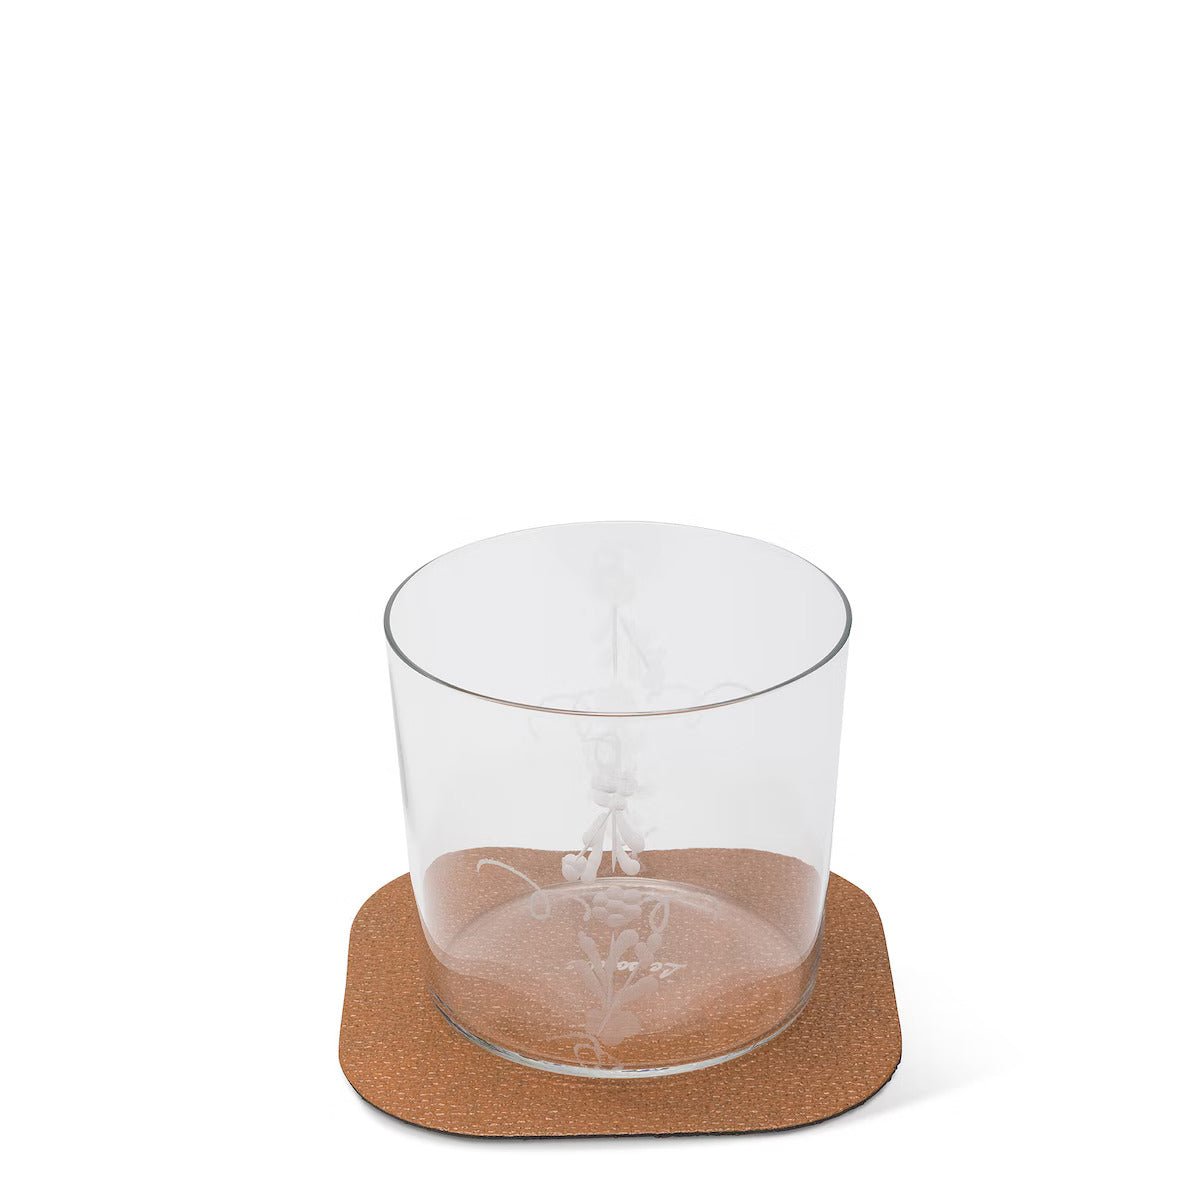 A textured washable paper coaster is shown in tan under a water glass.